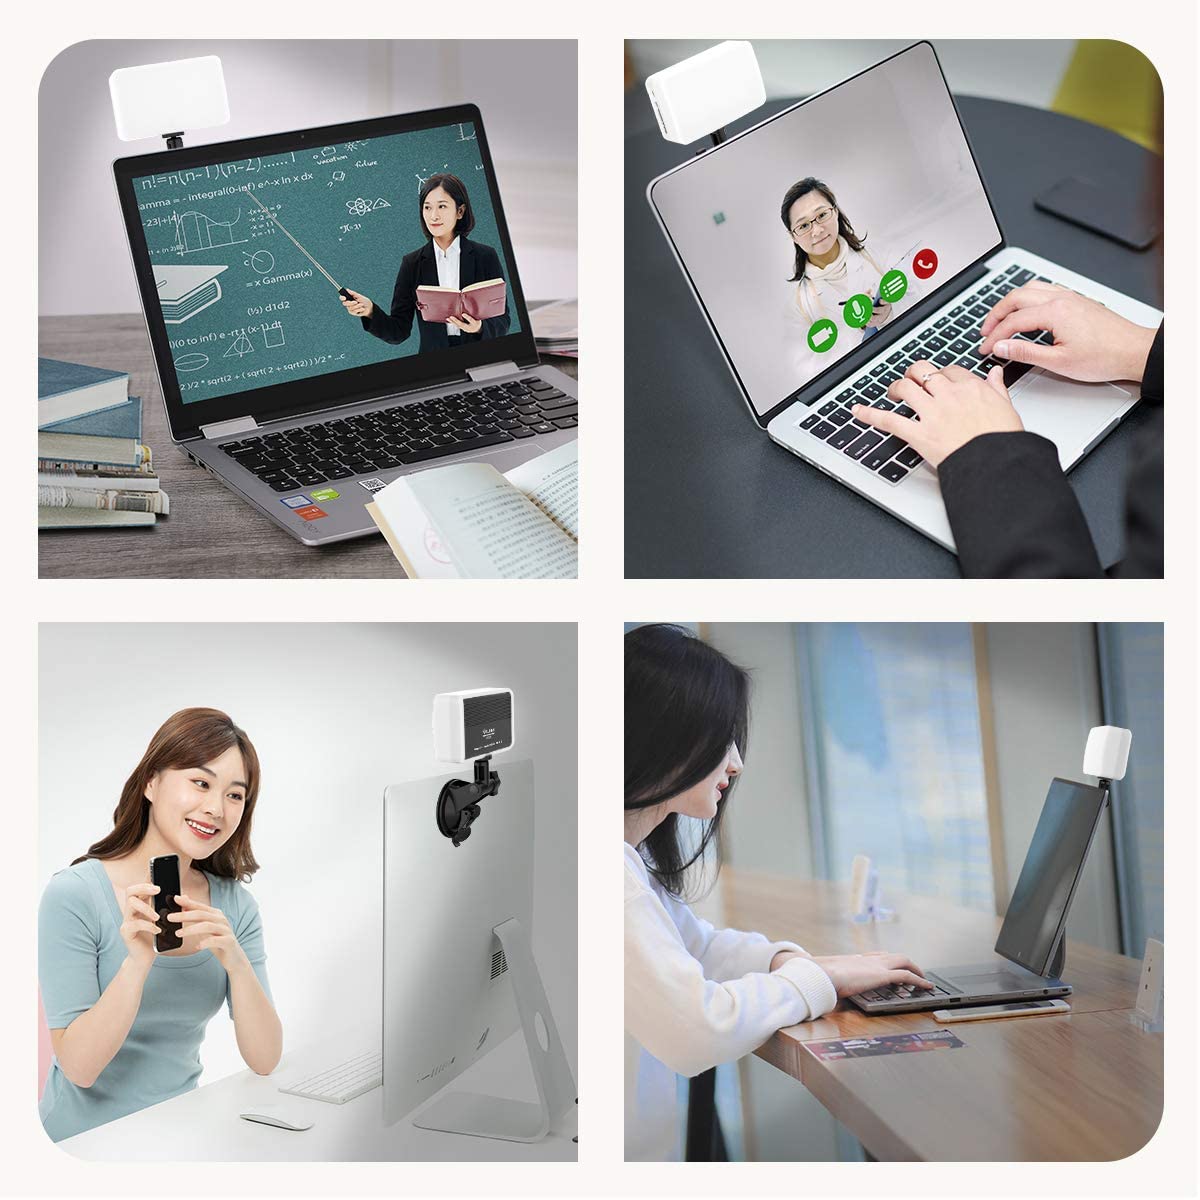 VIJIM VL120 powerful LED video calling lamp KIT - with suction cup for laptop / computer / monitor